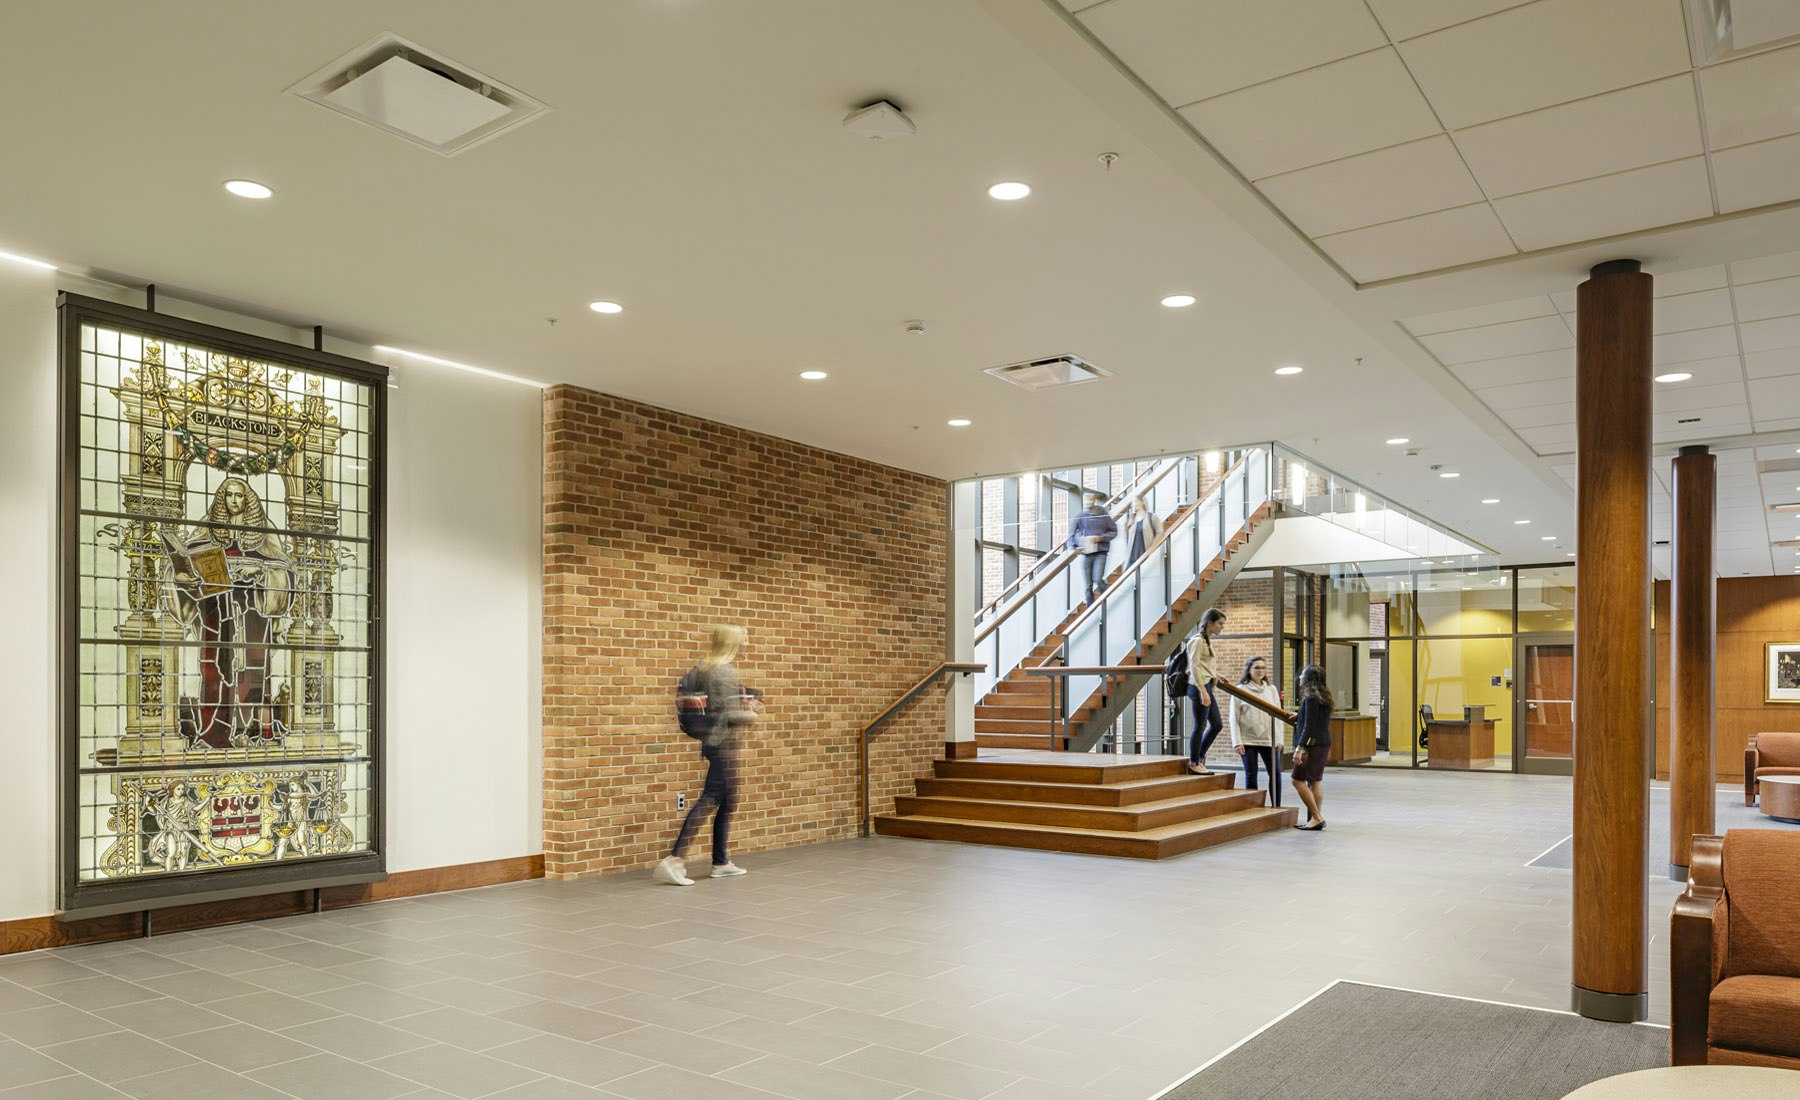 The Law School’s Hixon Center for Experiential Learning and Leadership provides a significant, warm, and welcoming place and helps to build an educational and cultural community. 